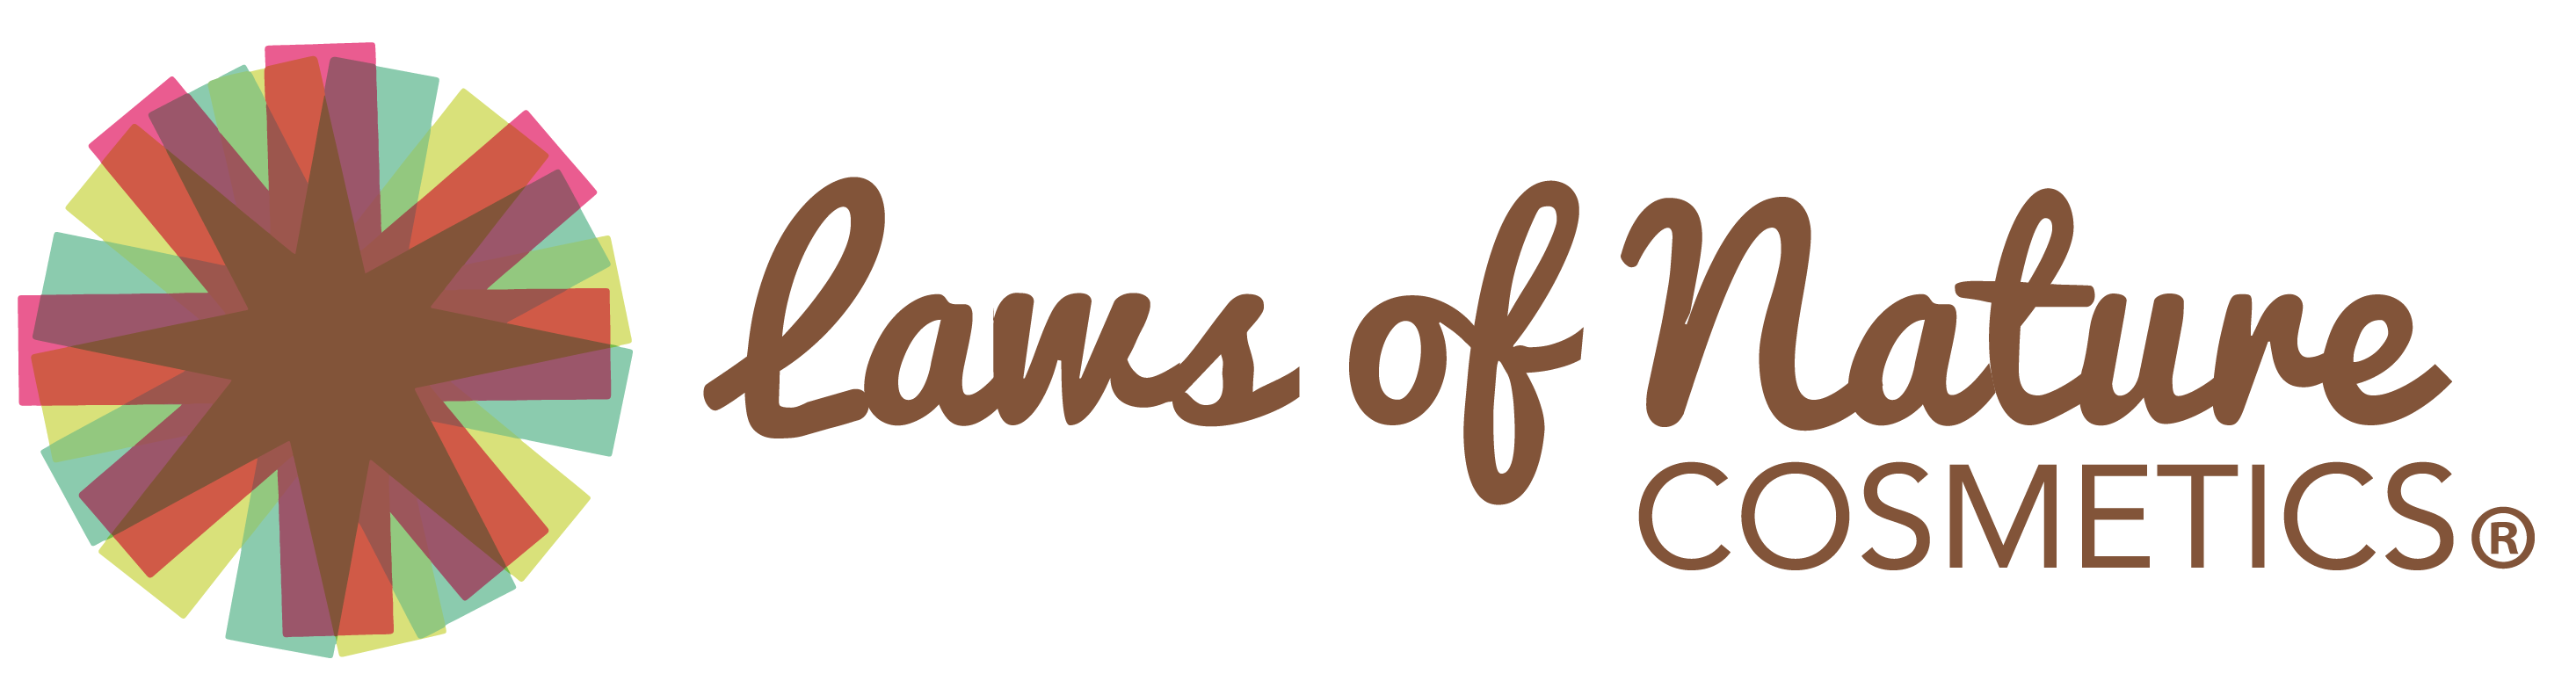 Laws of Nature Cosmetics Logo